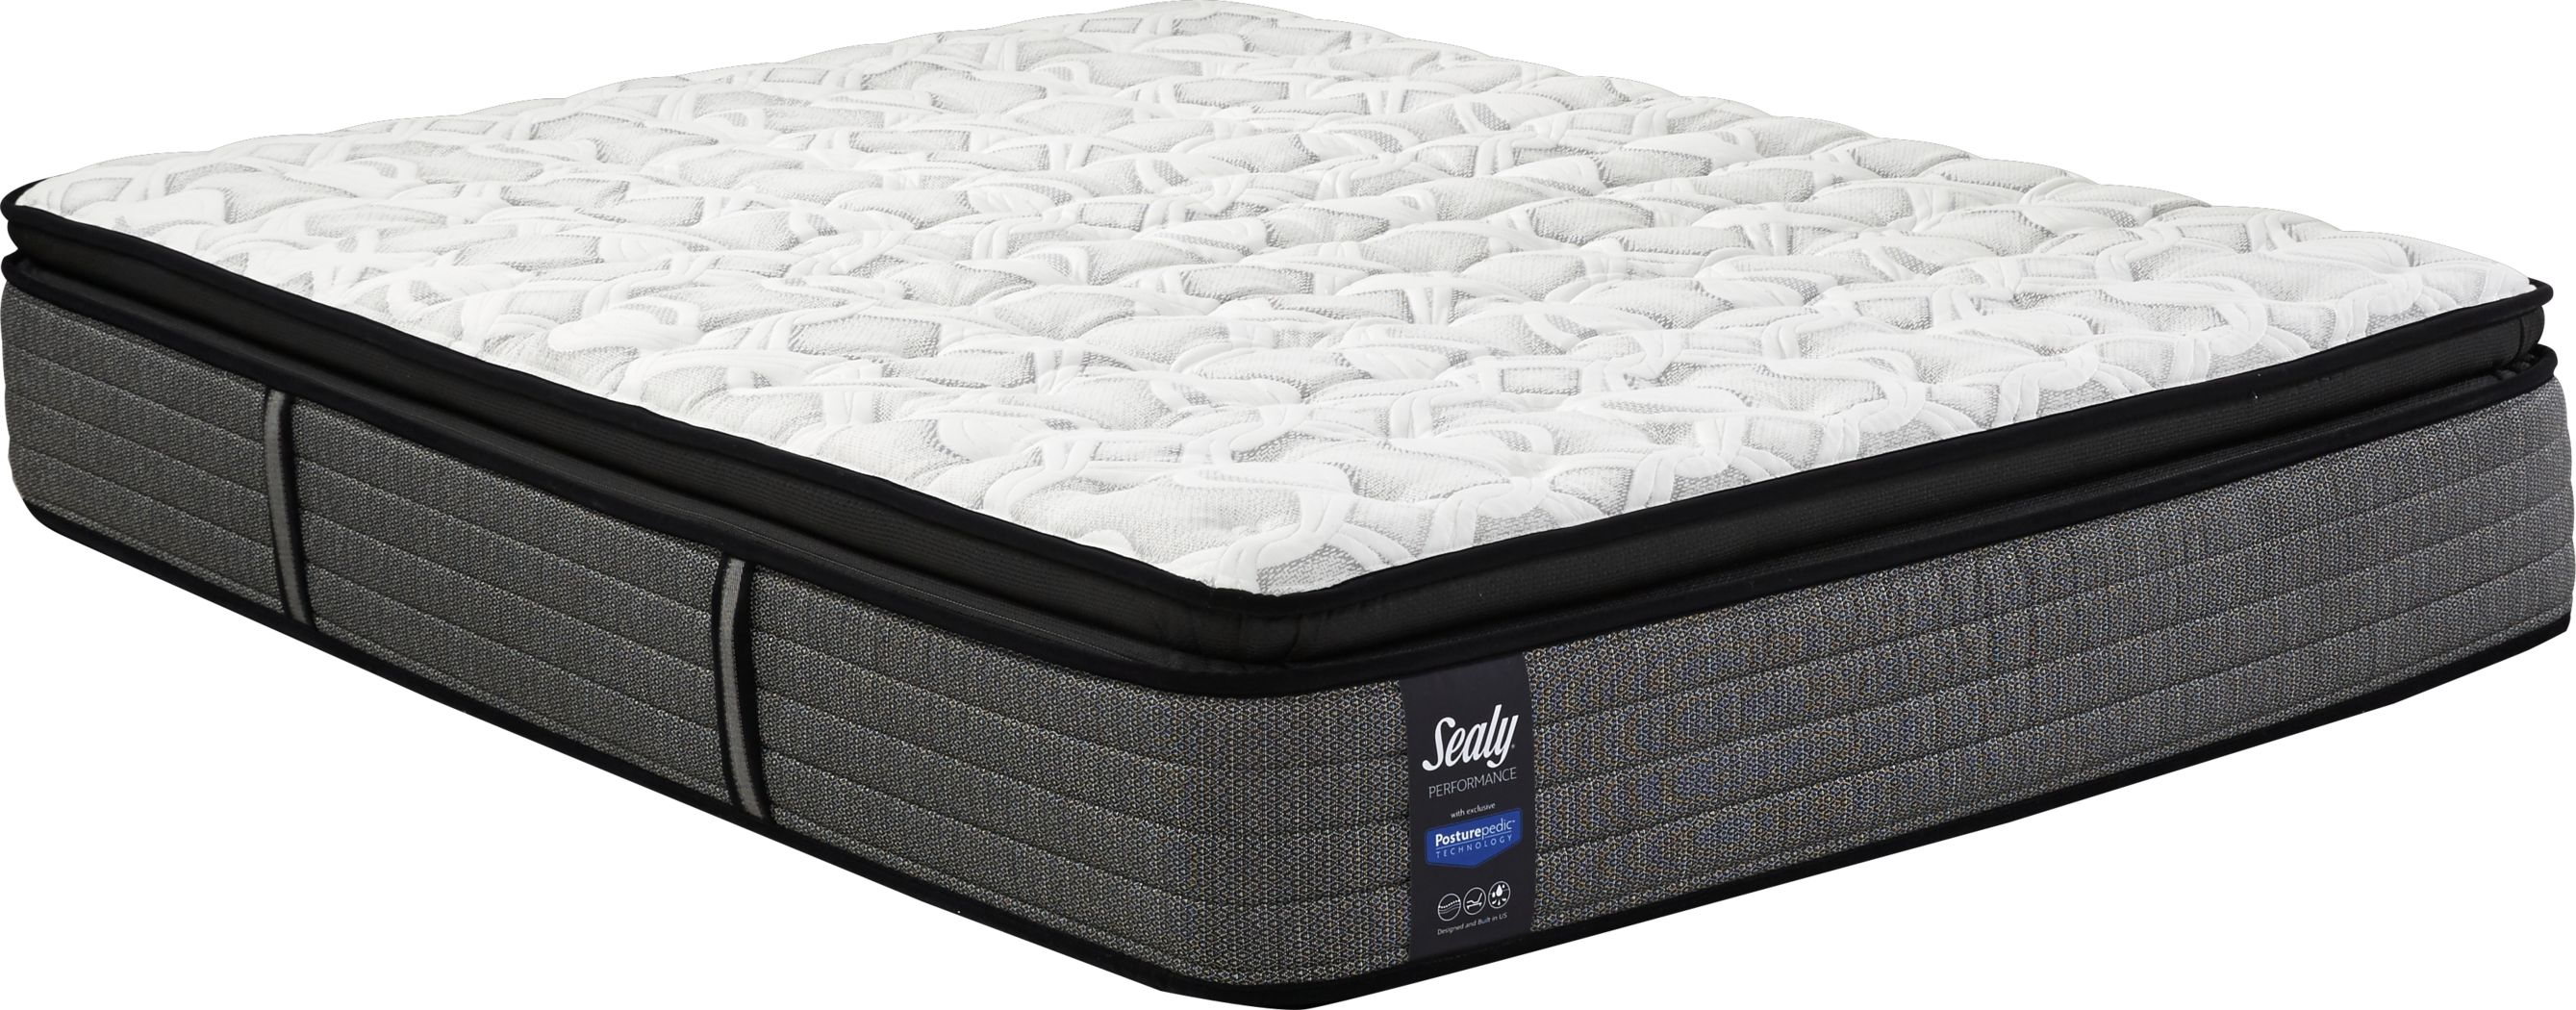 sealy talworth firm queen mattress set reviews